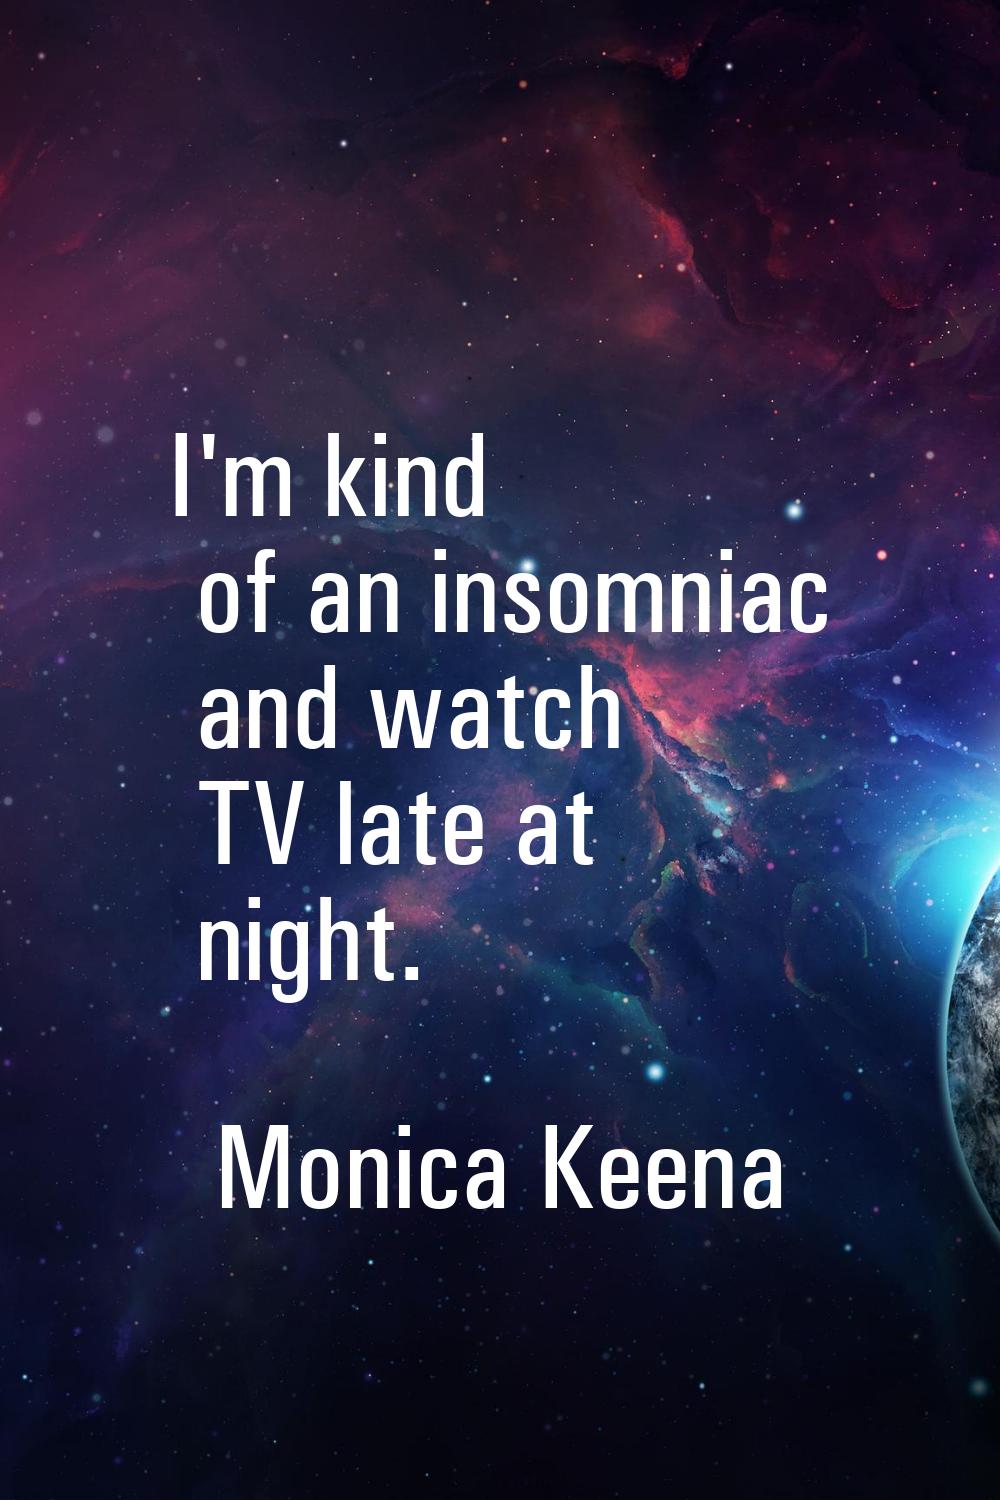 I'm kind of an insomniac and watch TV late at night.